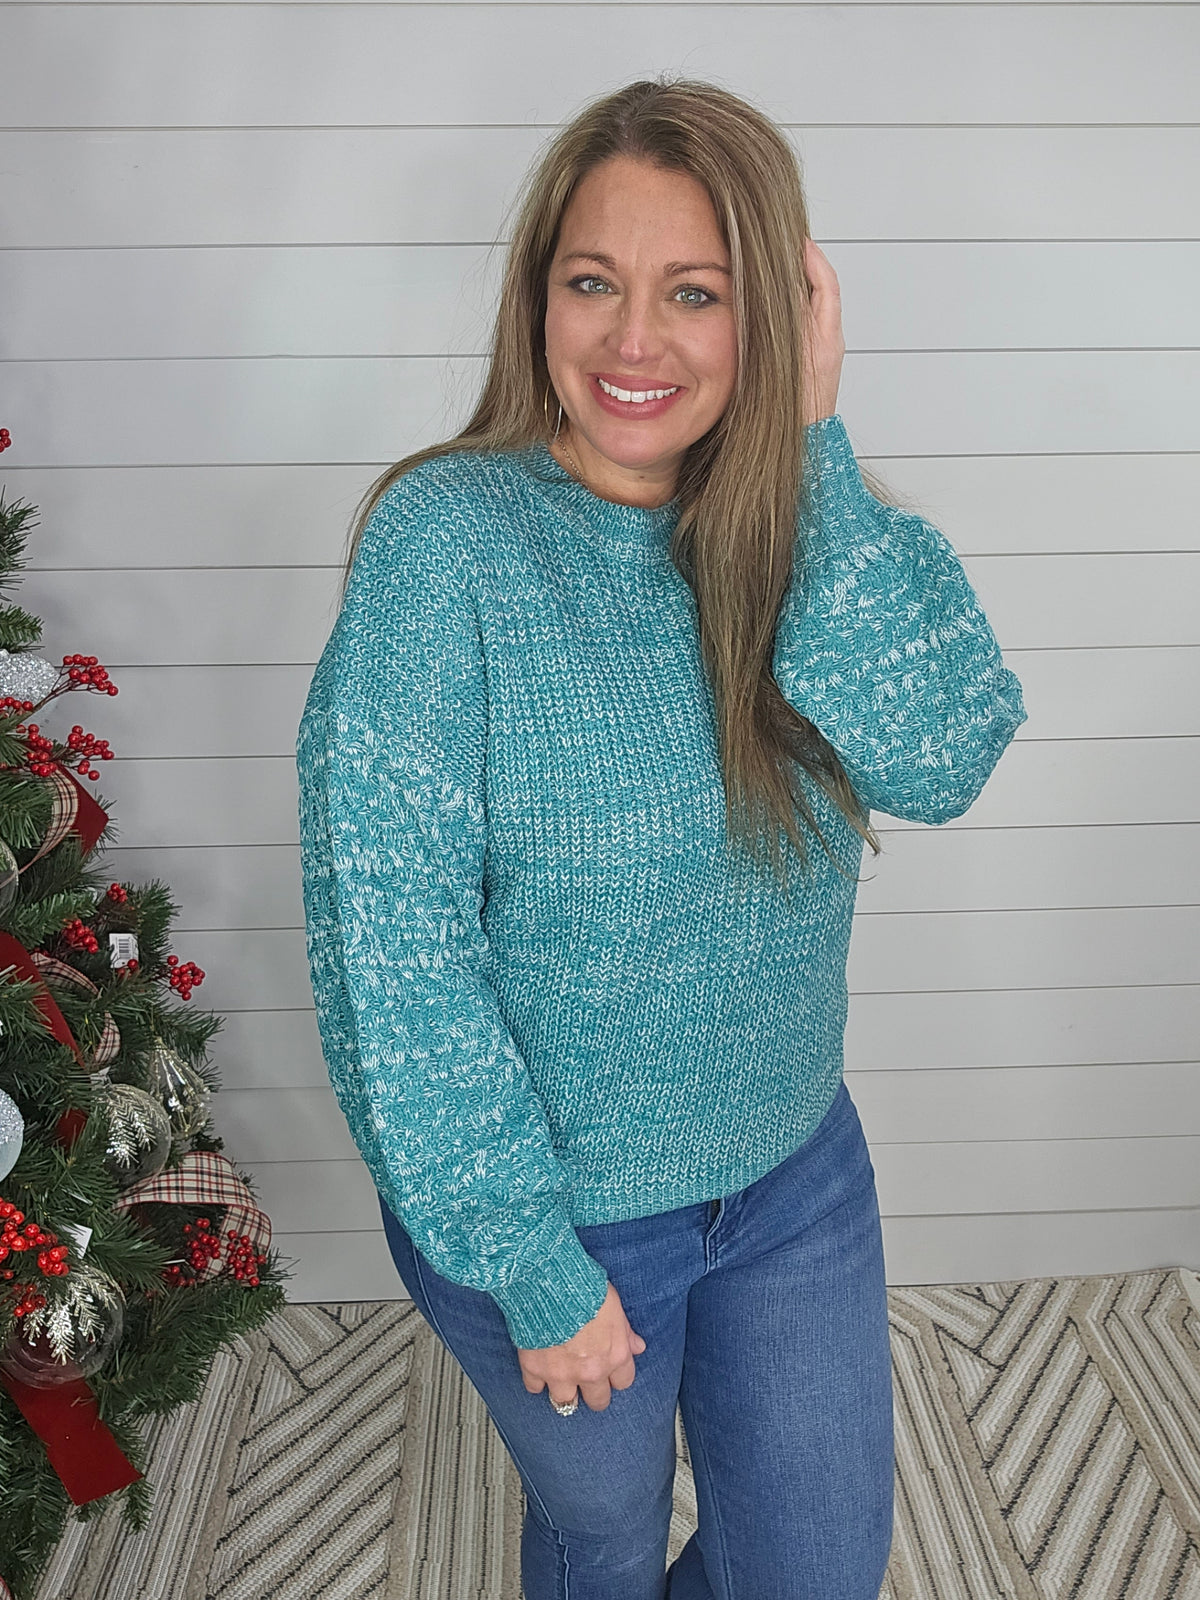 SEA GREEN CABLE KNIT DROP SHOULDER SWEATER